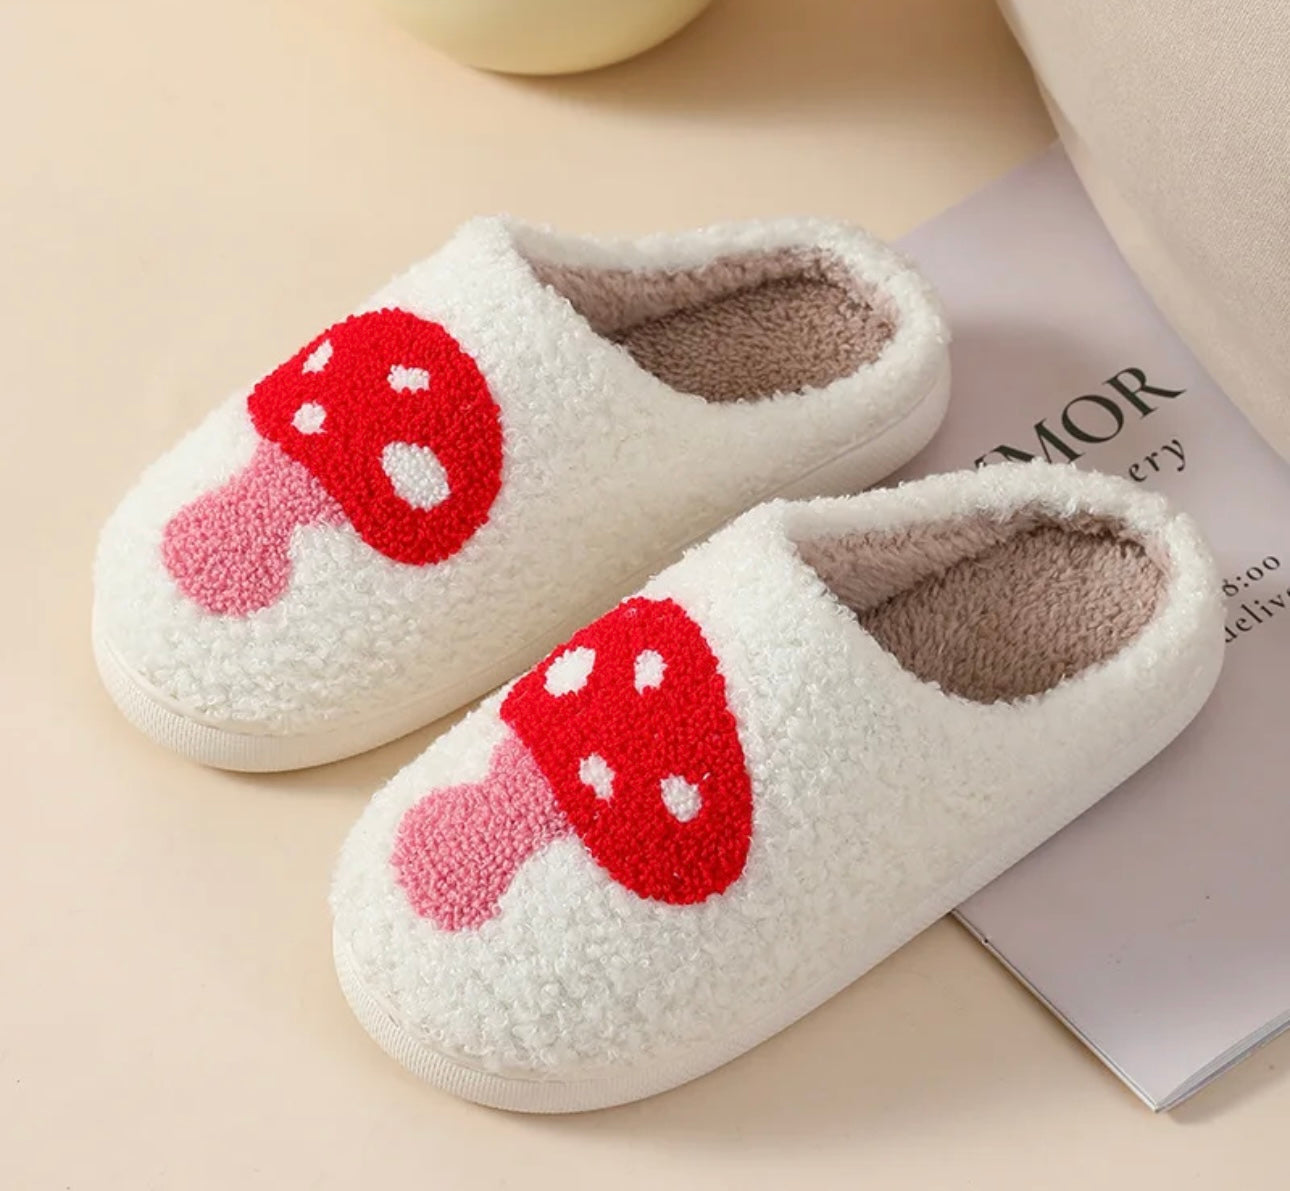 The Plush Bedroom Slippers